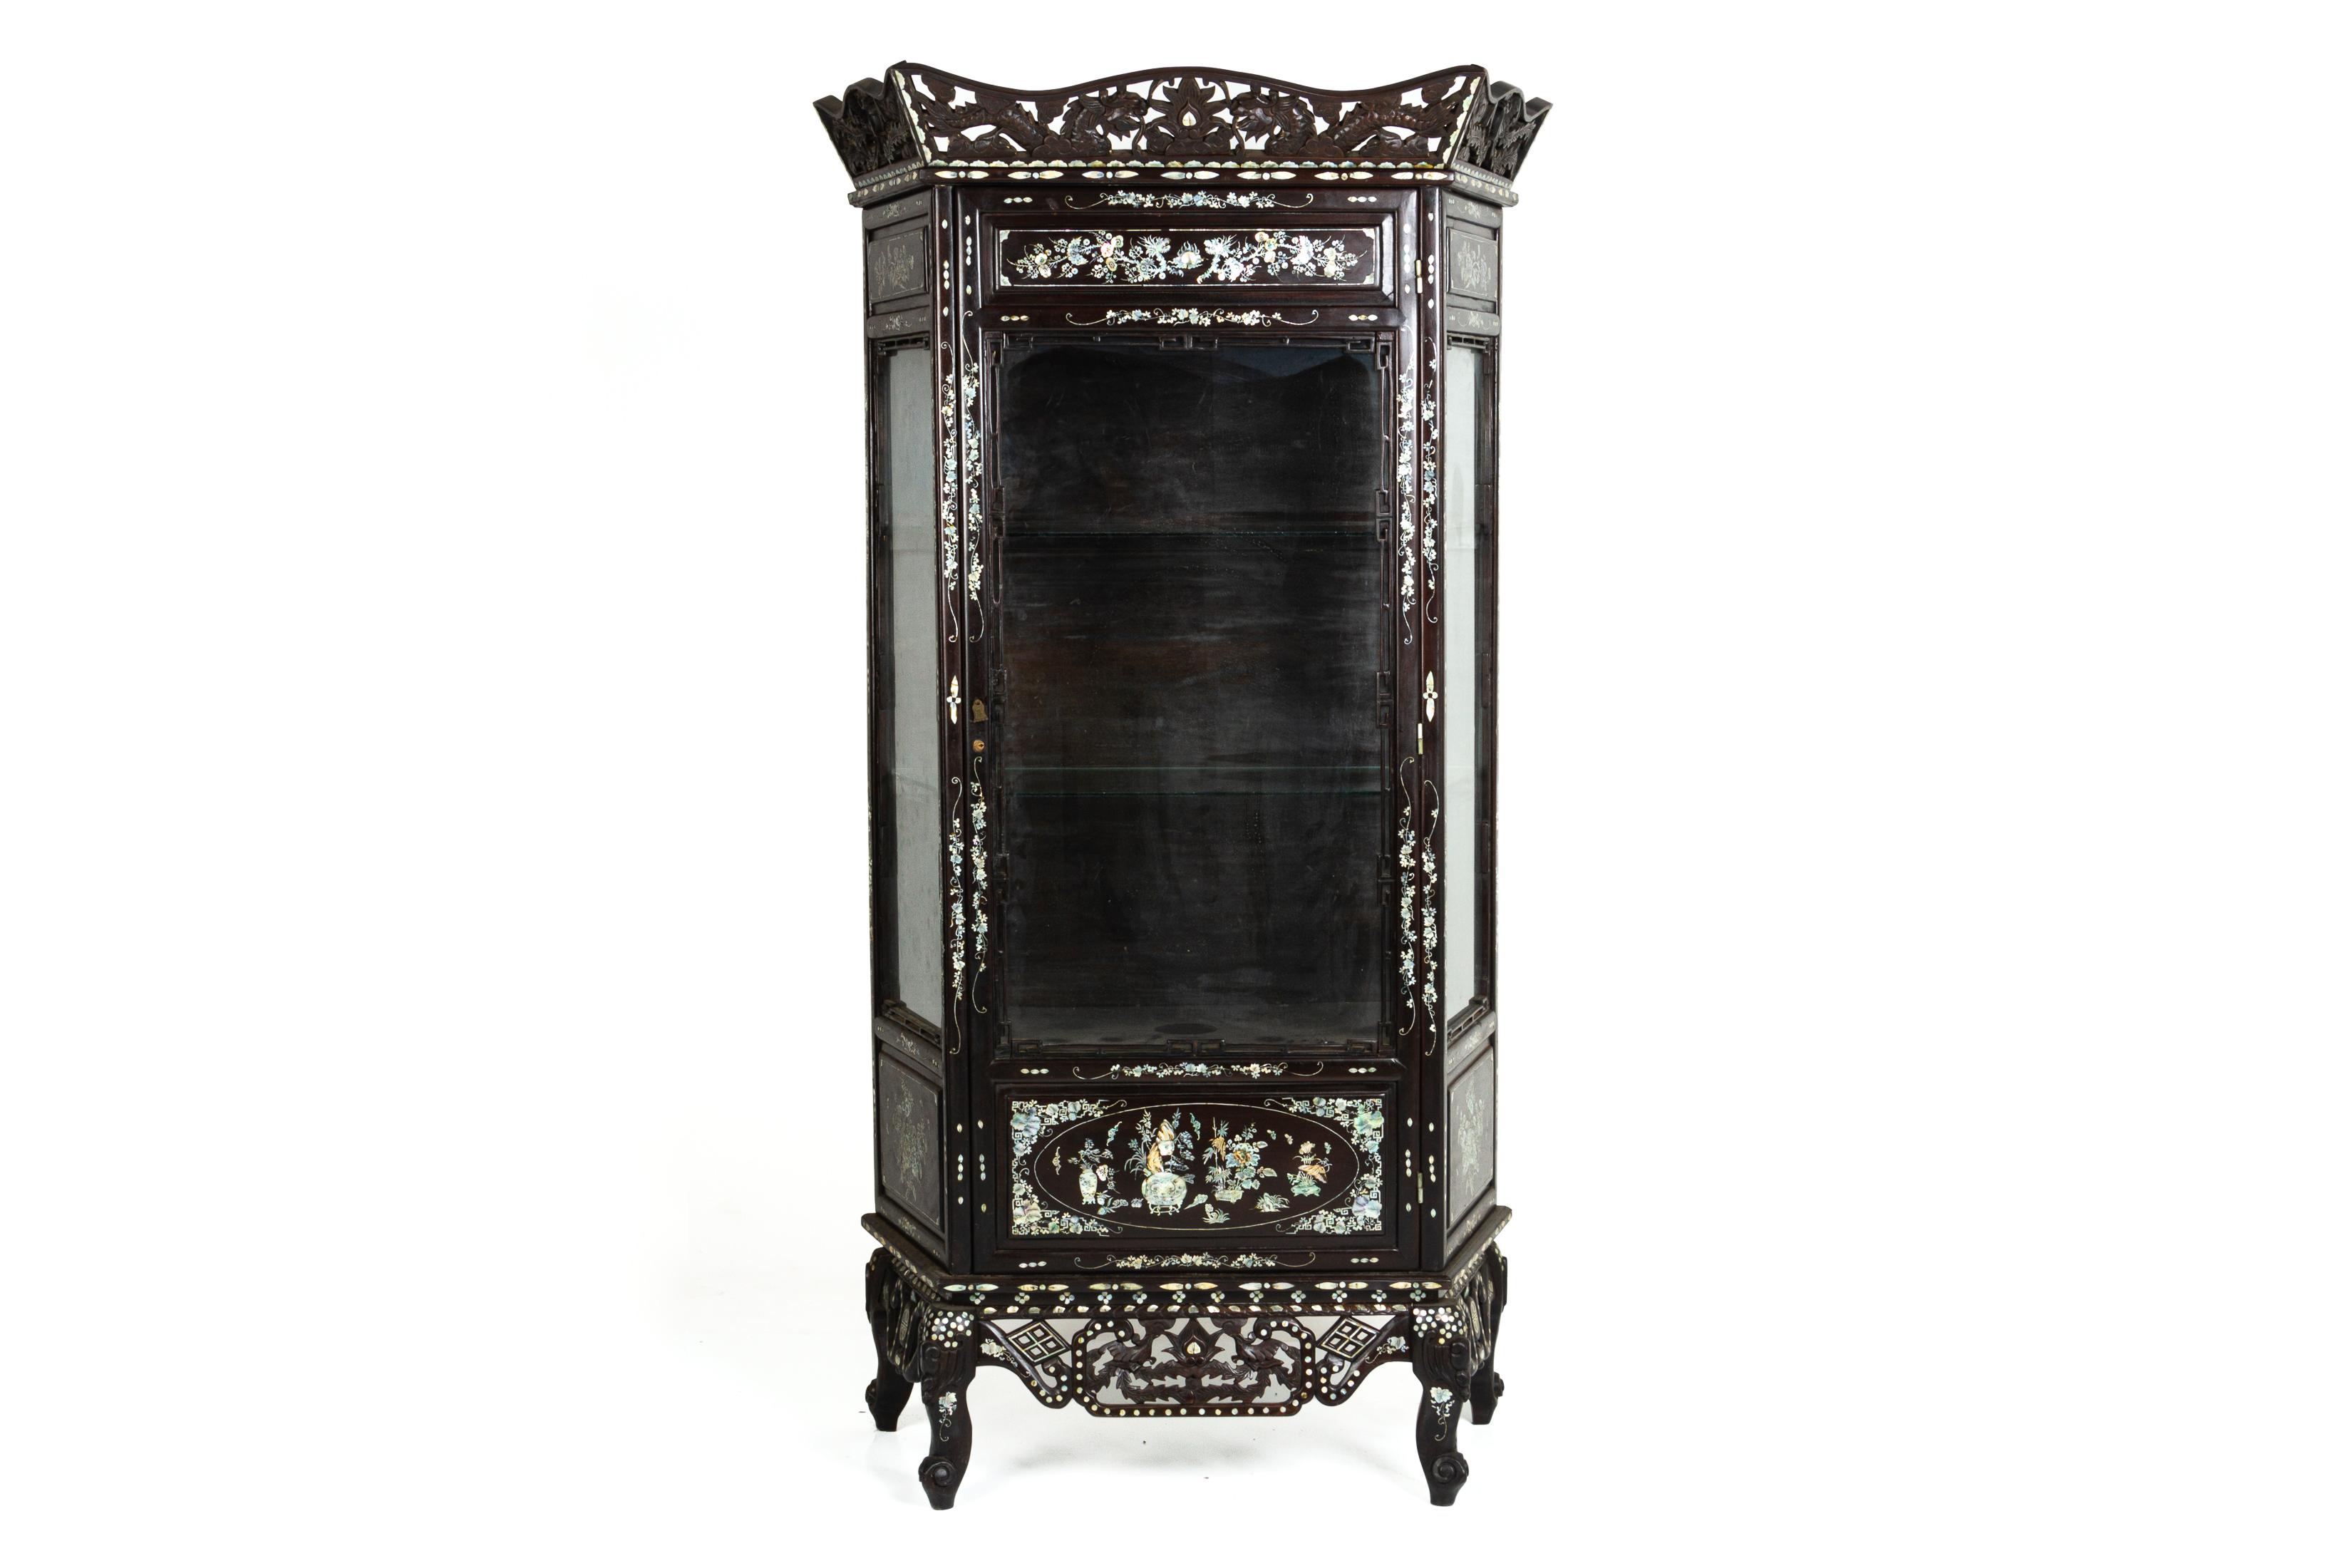 A GLAZED MOTHER OF PEARL INLAID DISPLAY CABINET